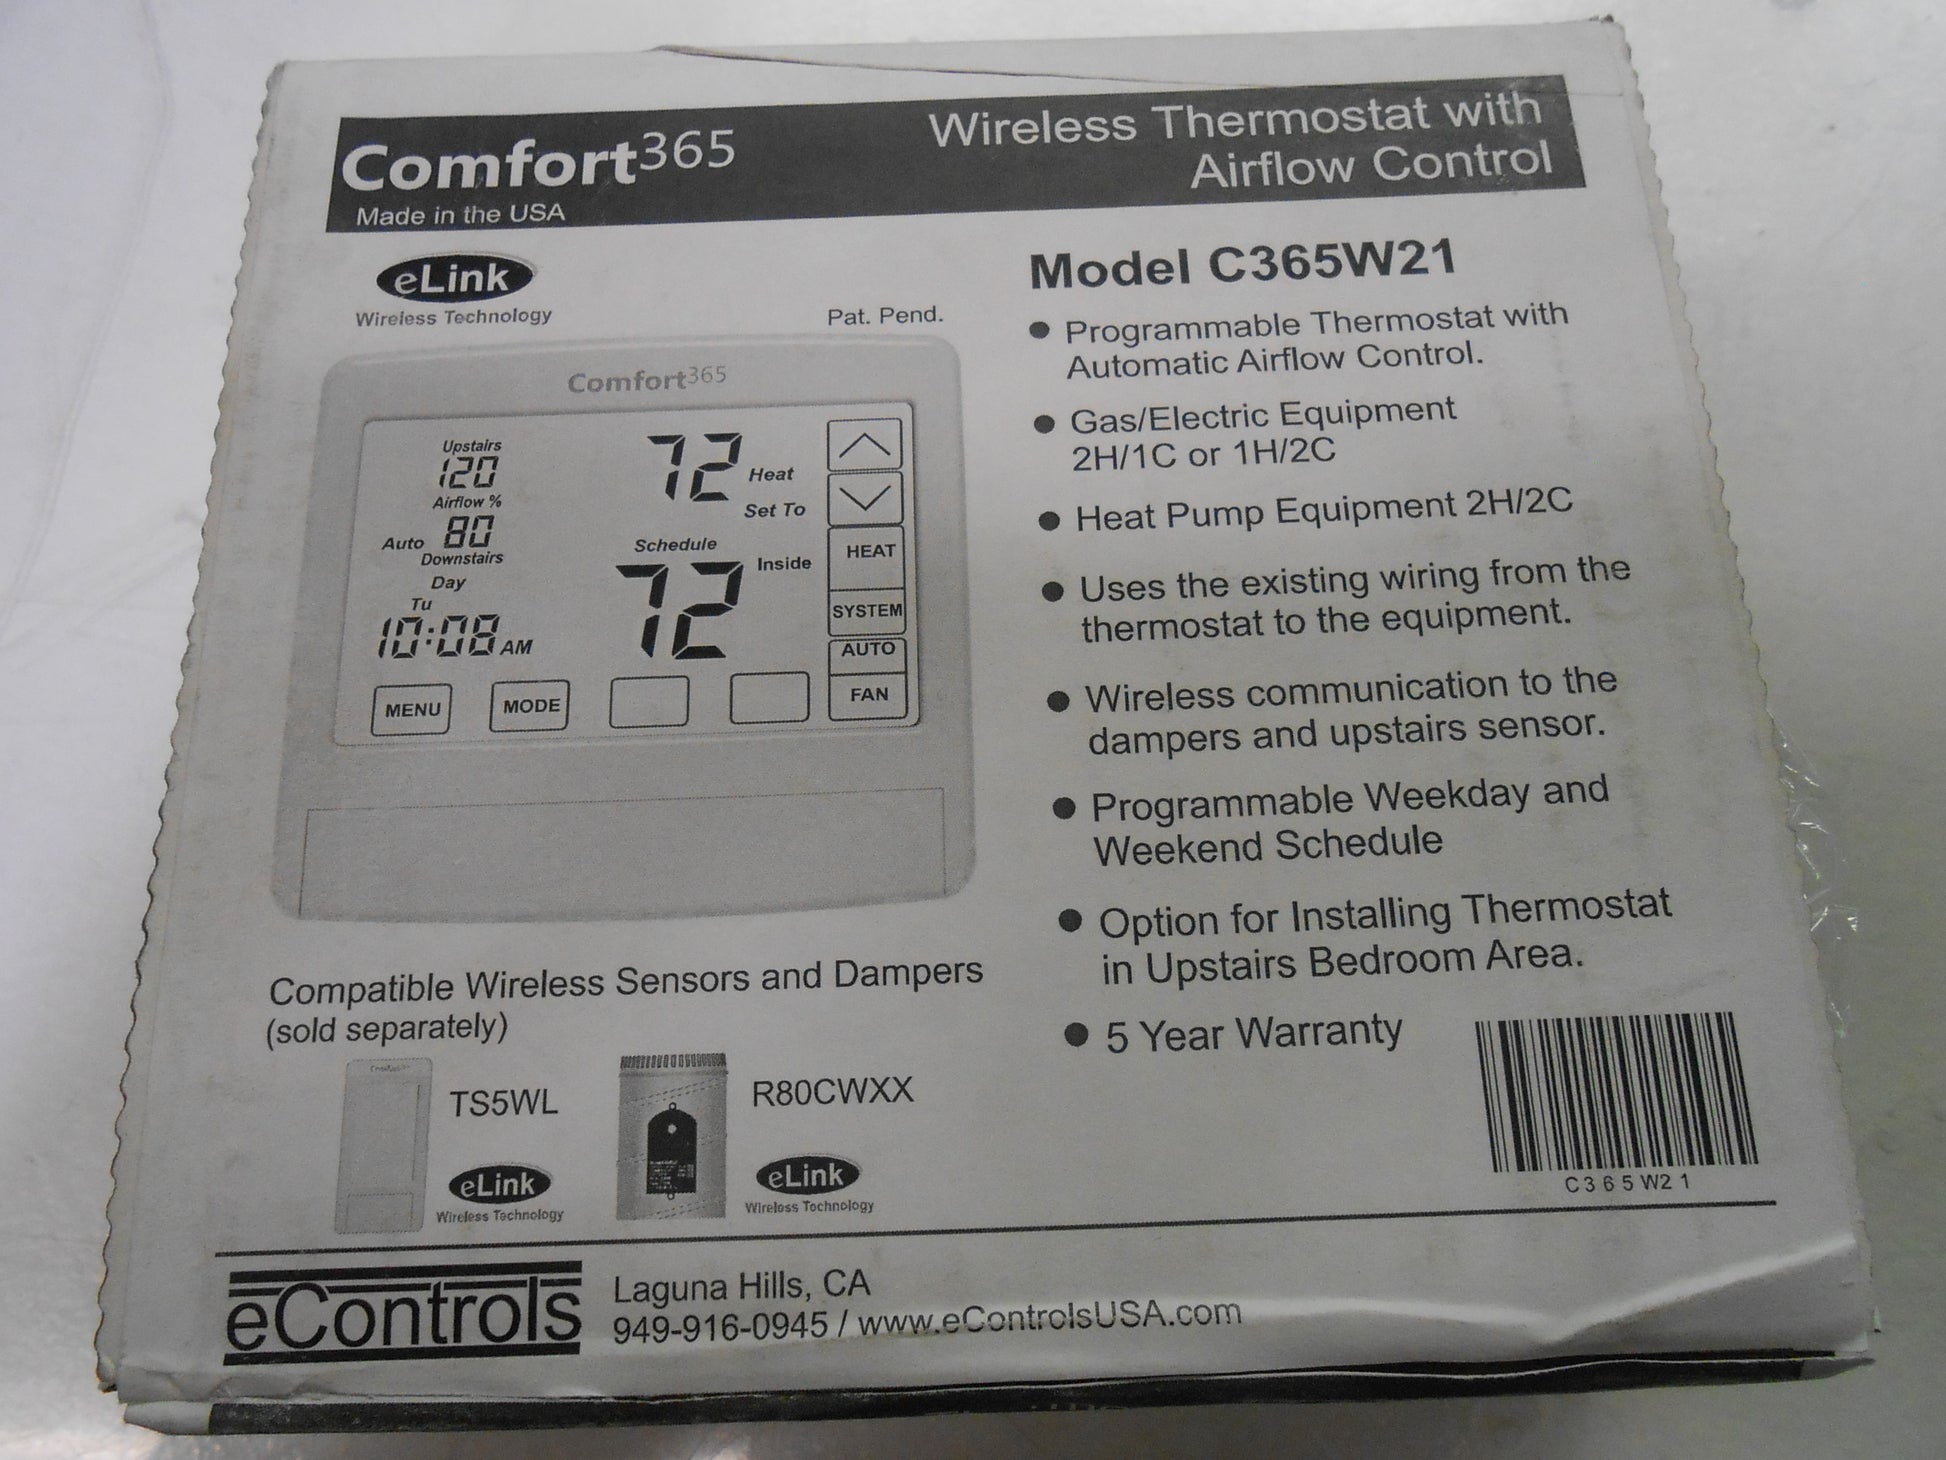 WIRELESS THERMOSTAT WITH AIRFLOW CONTROL